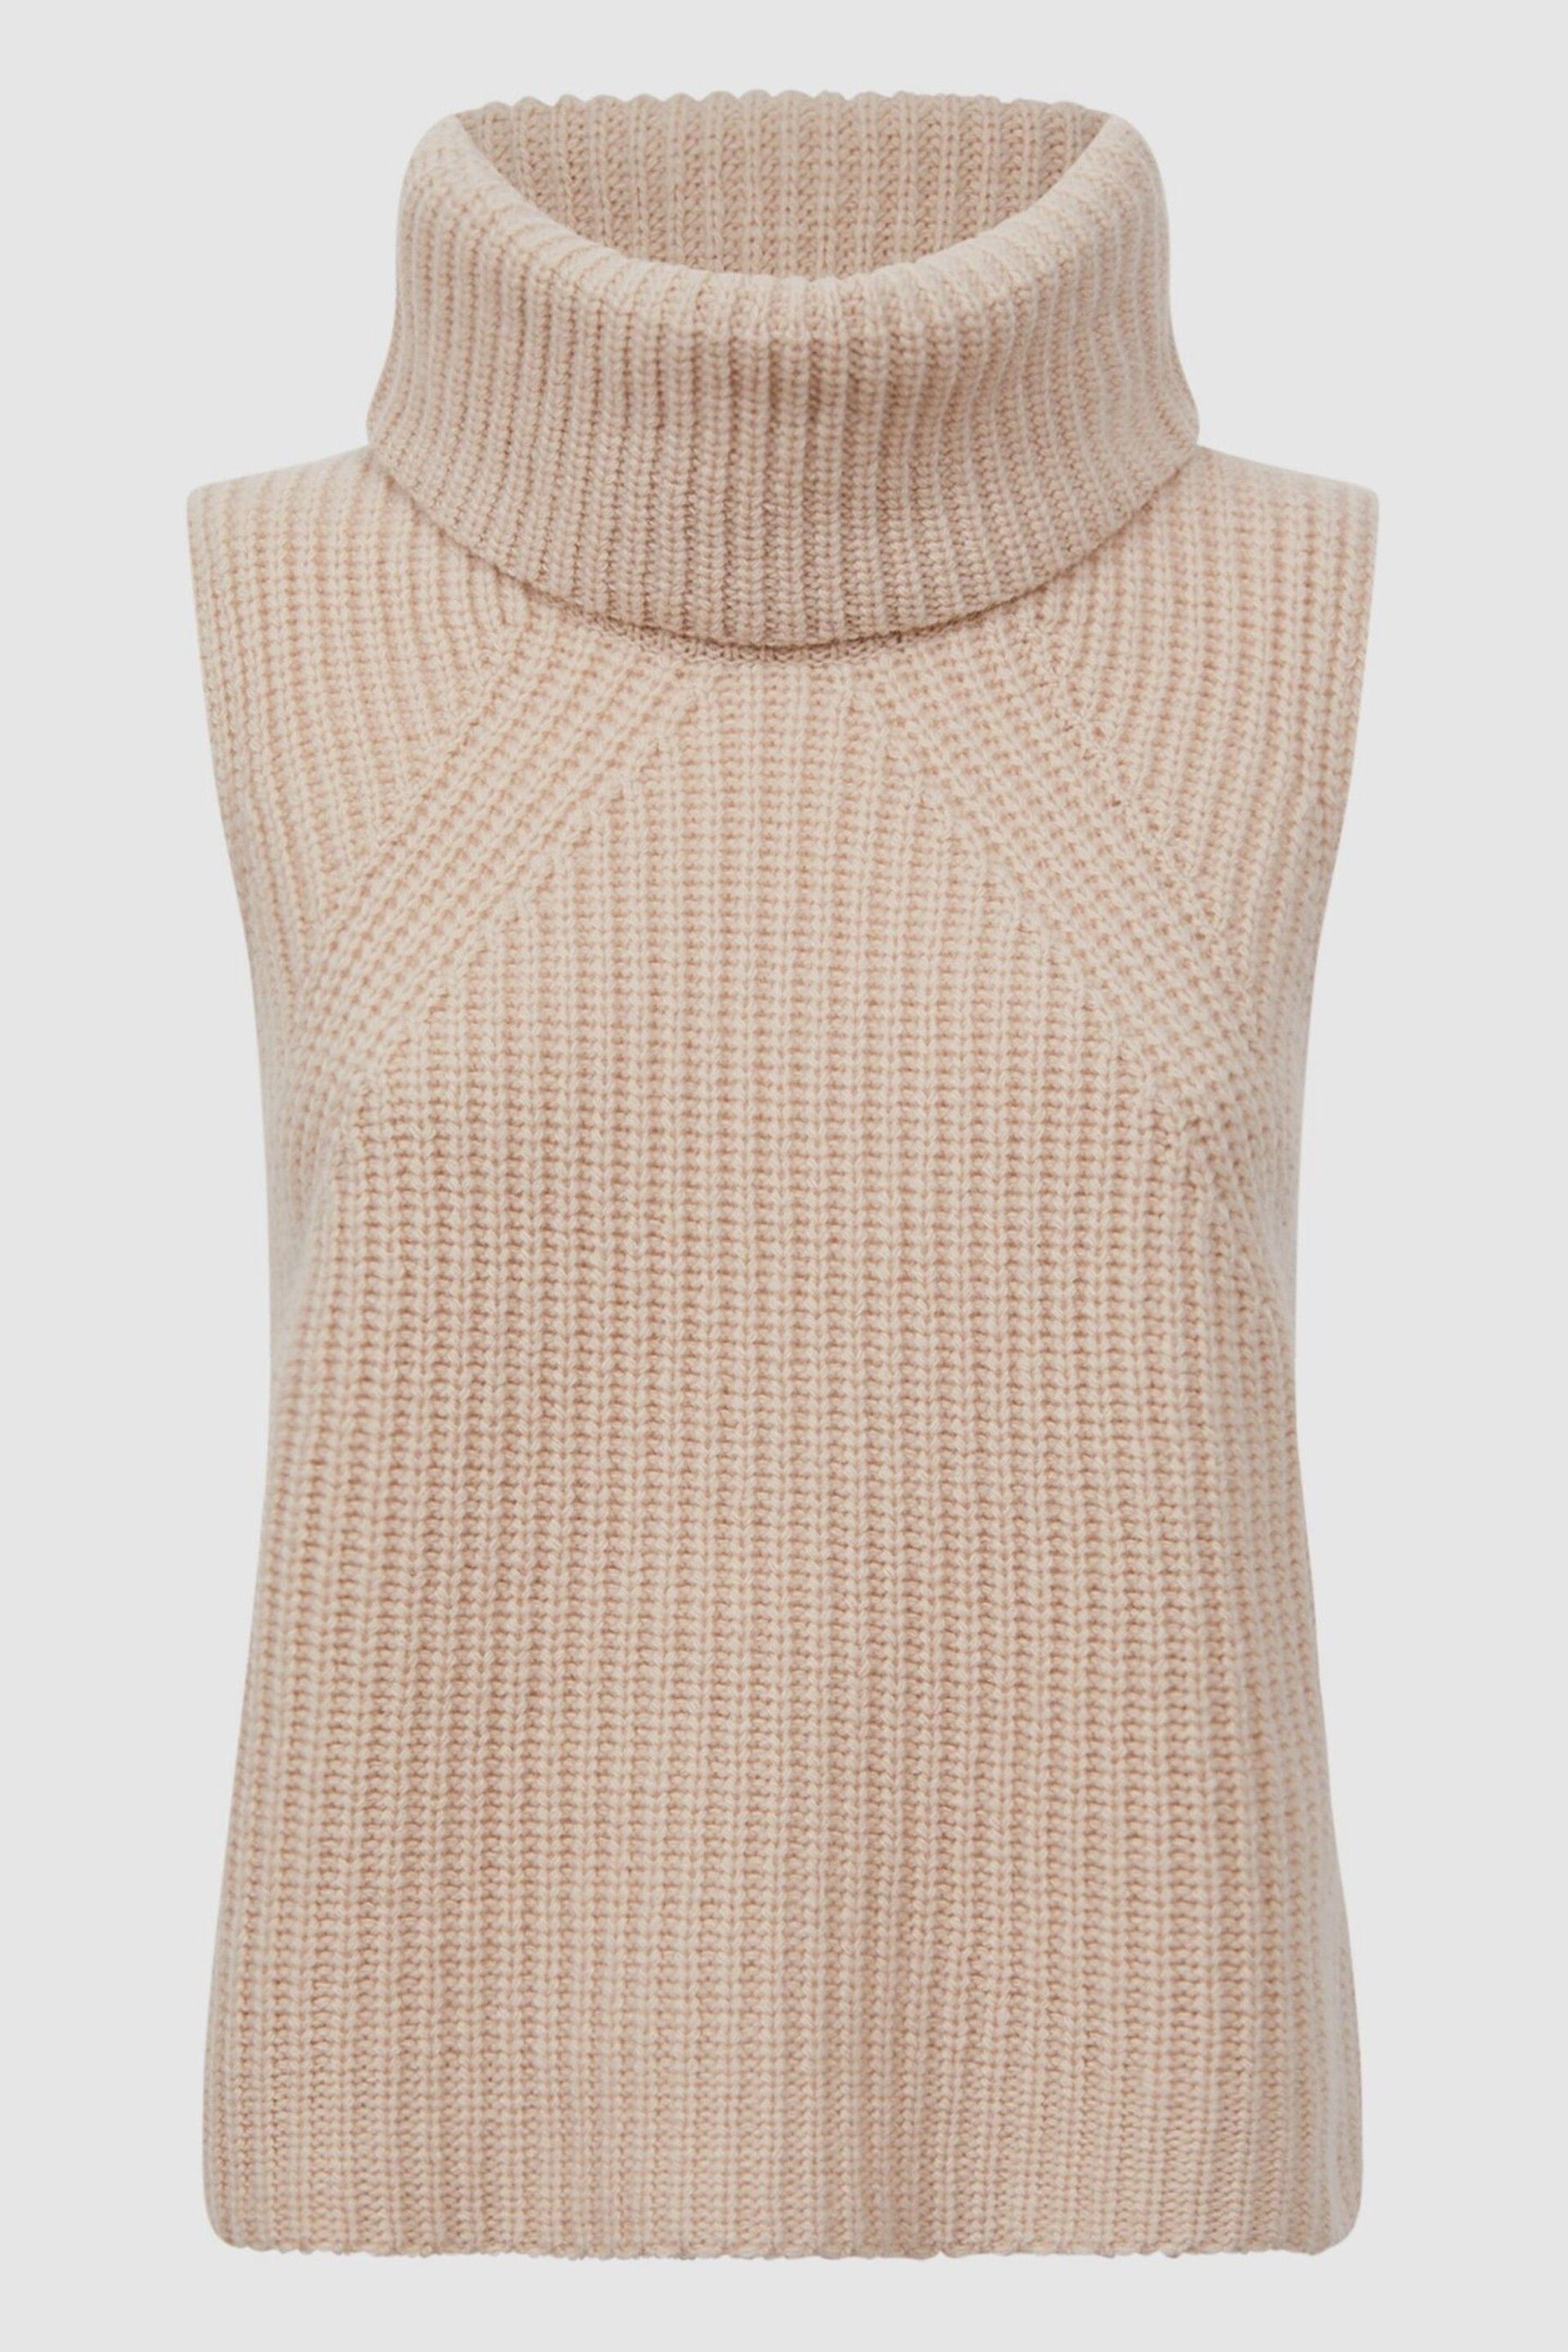 Reiss Neutral Kasha Wool-Cashmere Sleeveless Removable Roll Neck Vest - Image 2 of 7